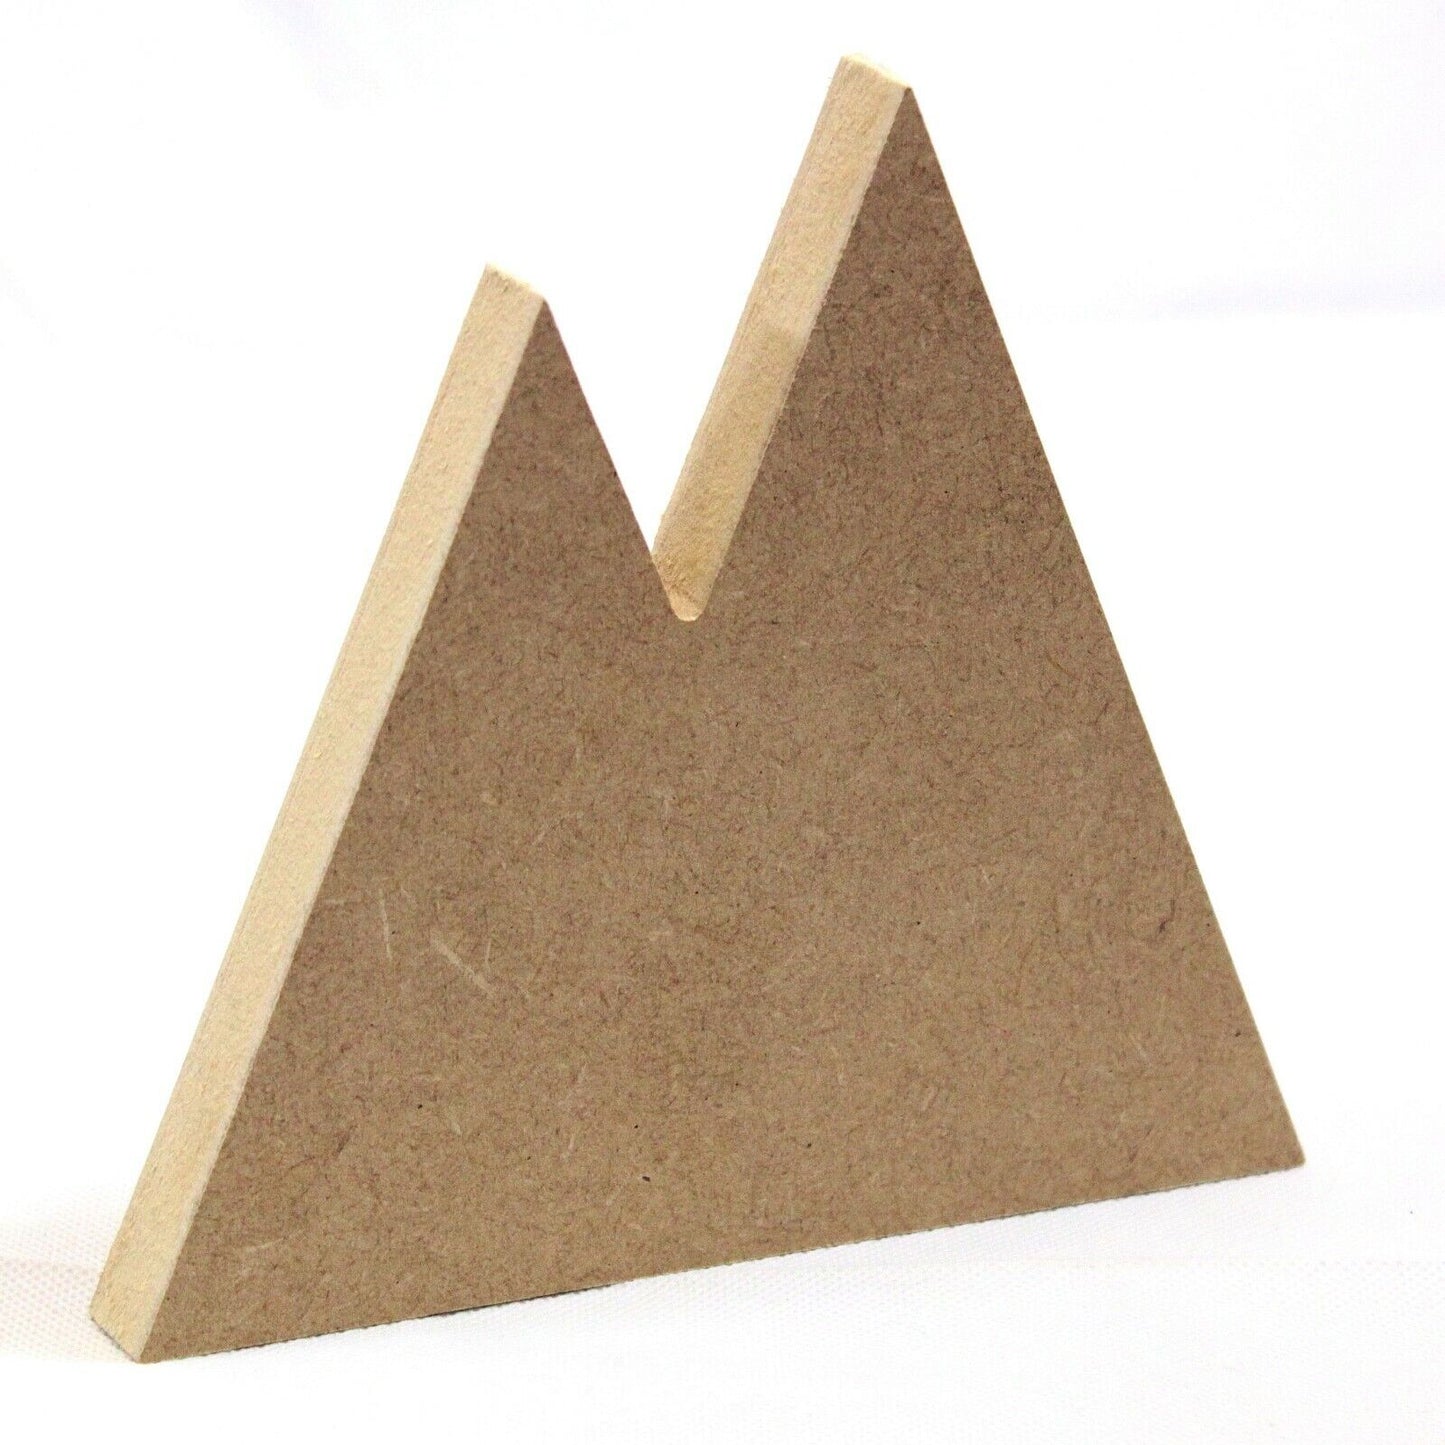 Free Standing 18mm MDF Mountain Craft Shape Various Sizes. 2 Shape Options.